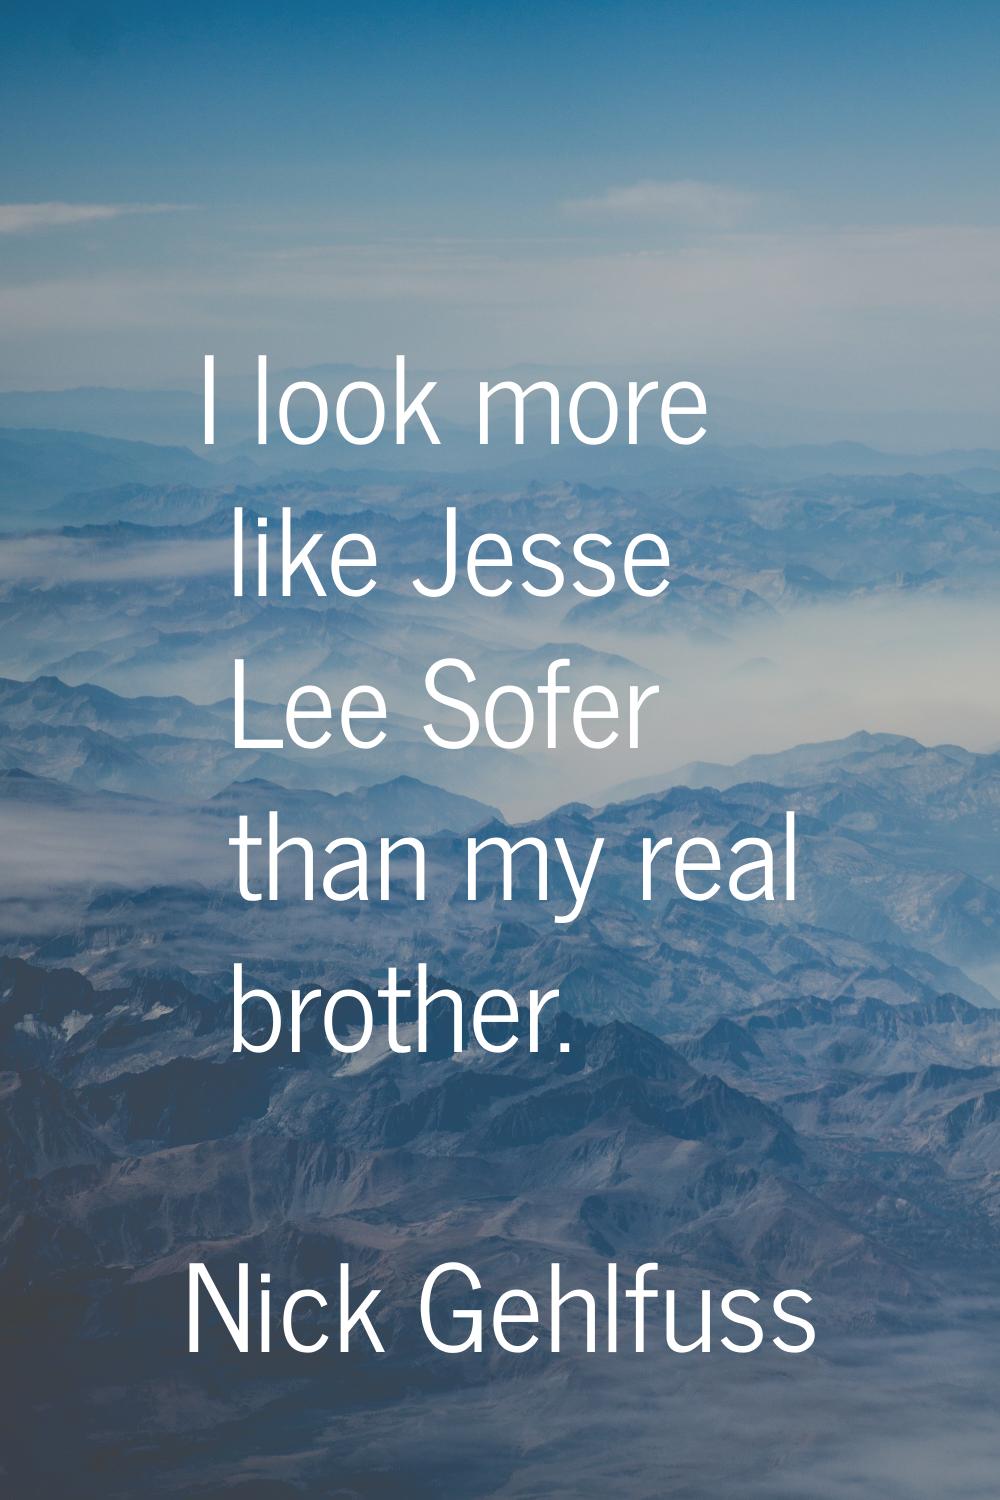 I look more like Jesse Lee Sofer than my real brother.